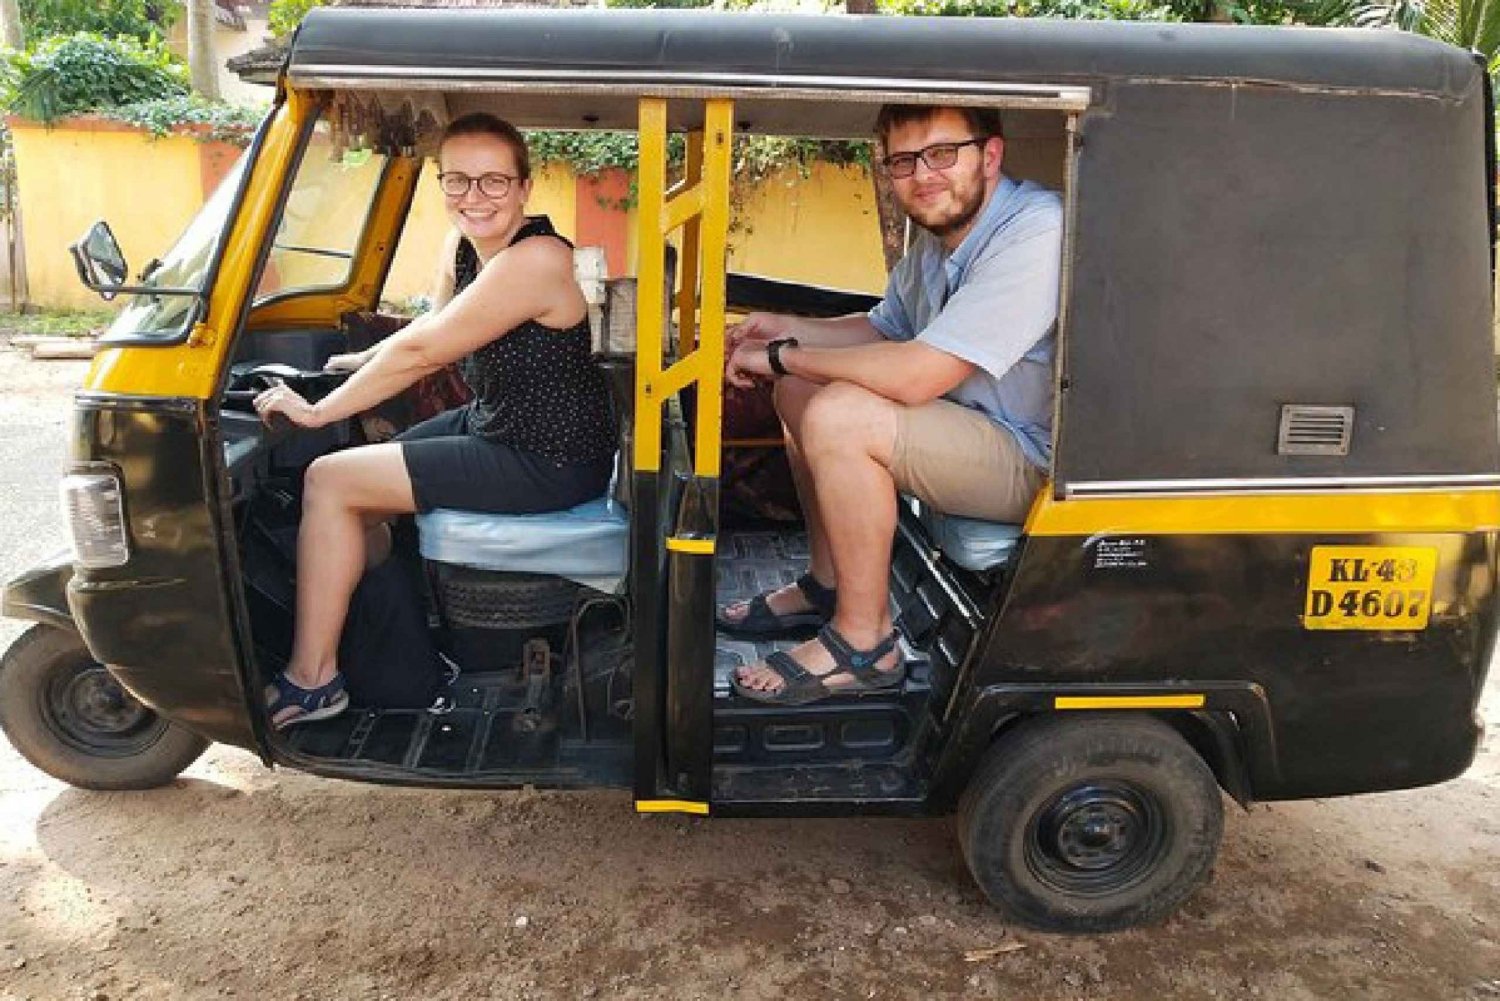 Cairo: City Highlights Guided Tuk-Tuk Tour with Hotel Pickup